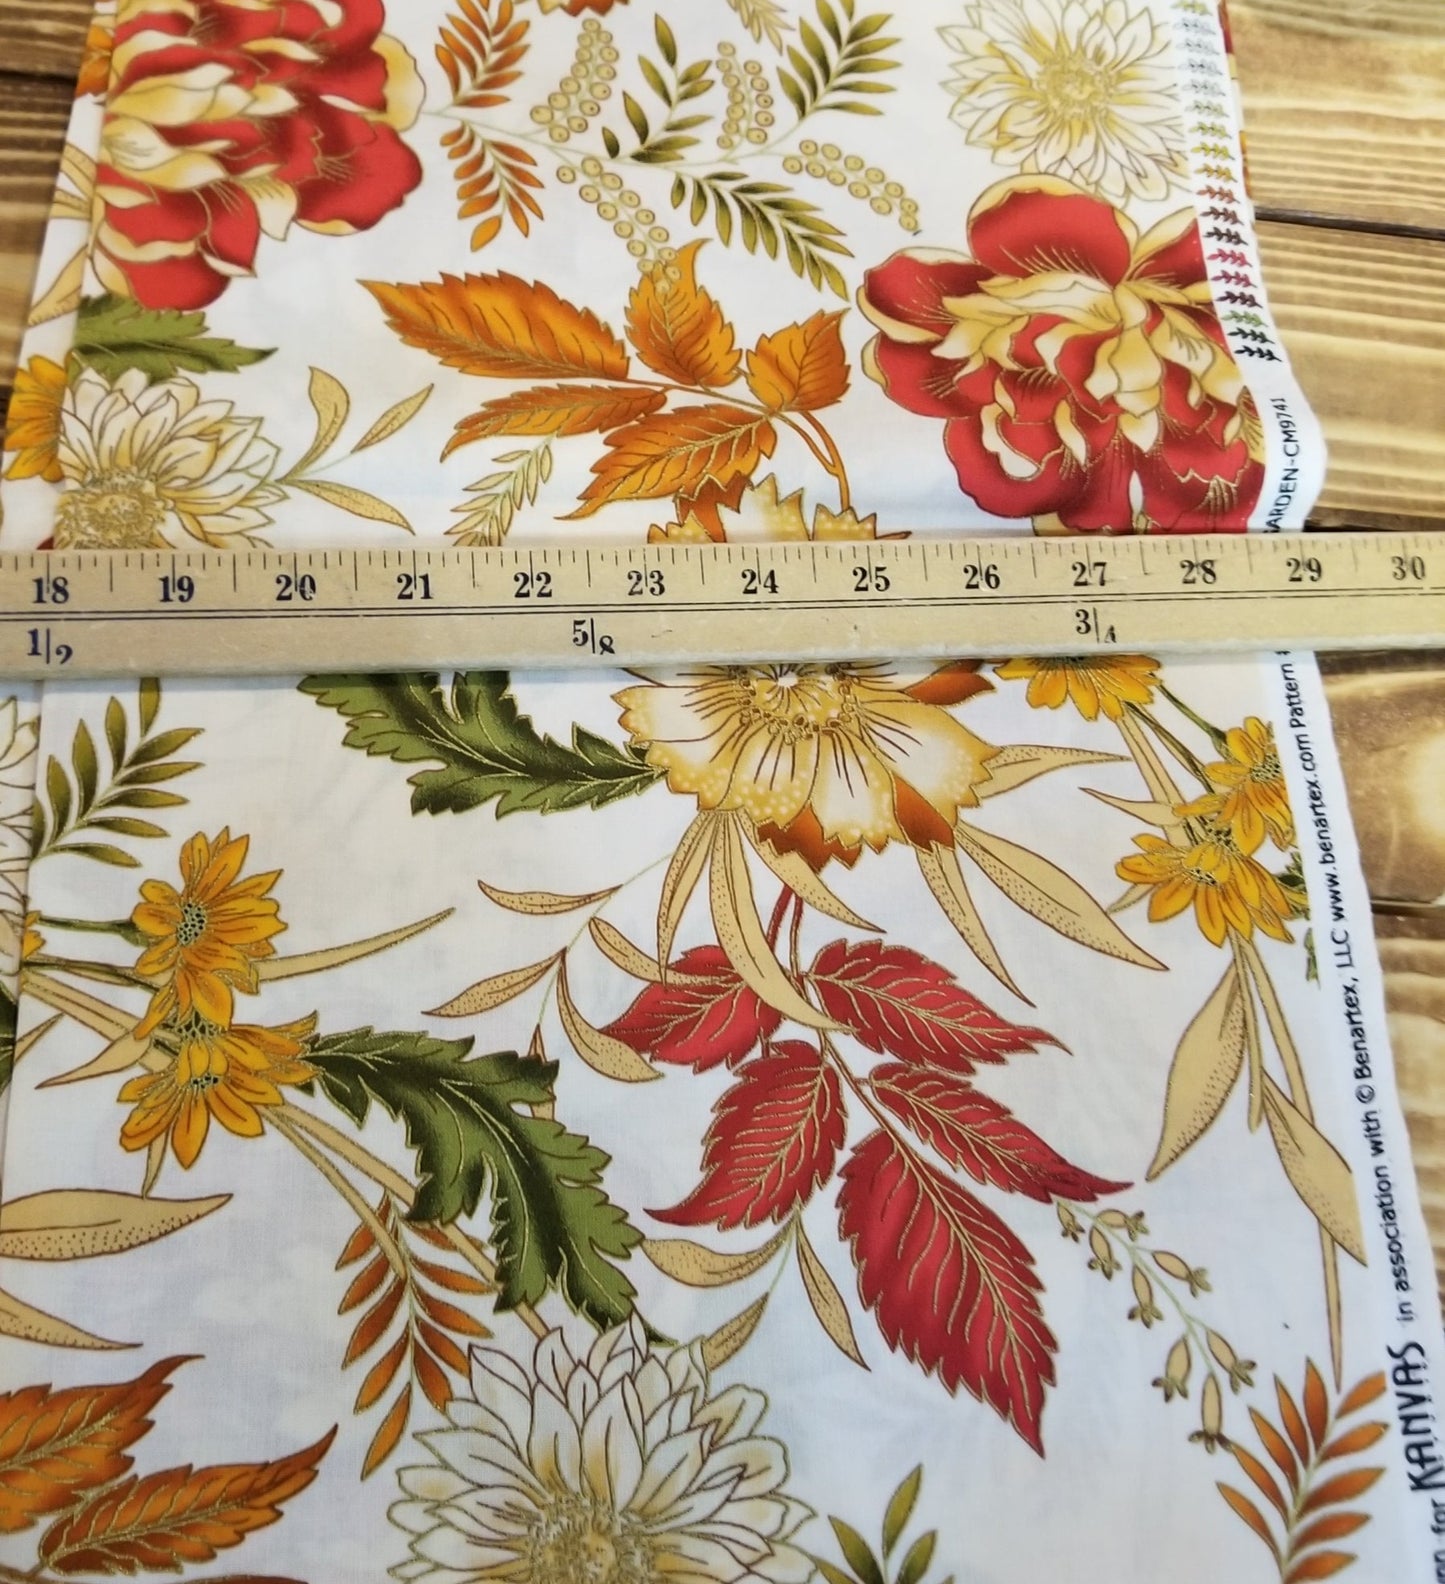 End of Bolt: 1 yard Quilting Cotton Radiance by Greta Lynn for Kanvas Woven- Remnant